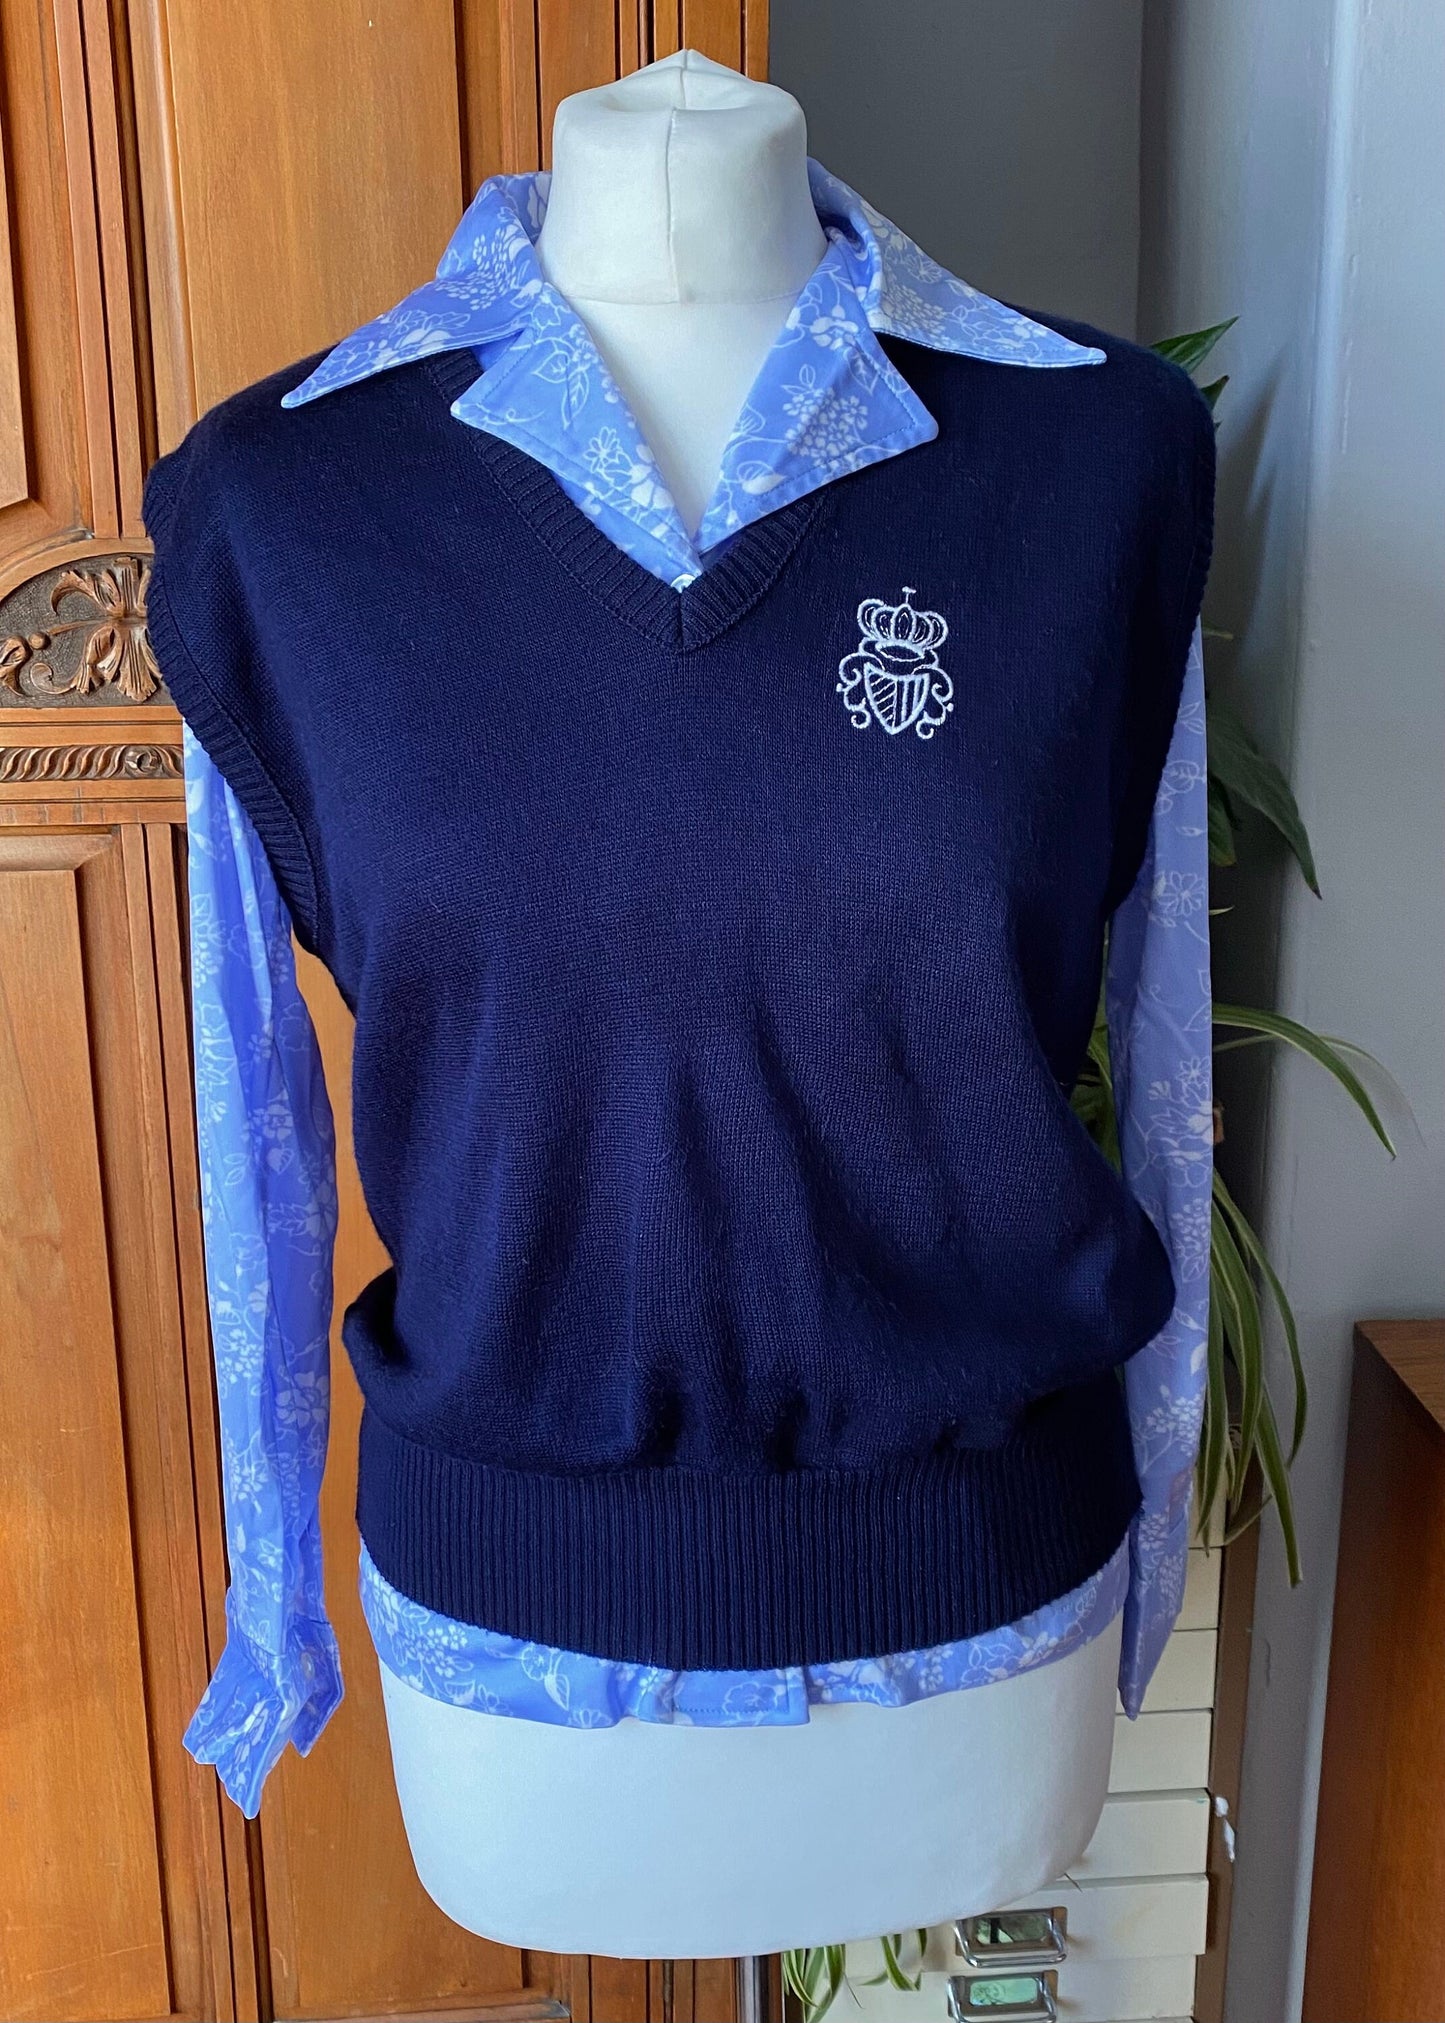 80s blue tank top/sweater vest with white crown motif. Approx UK size 10-16